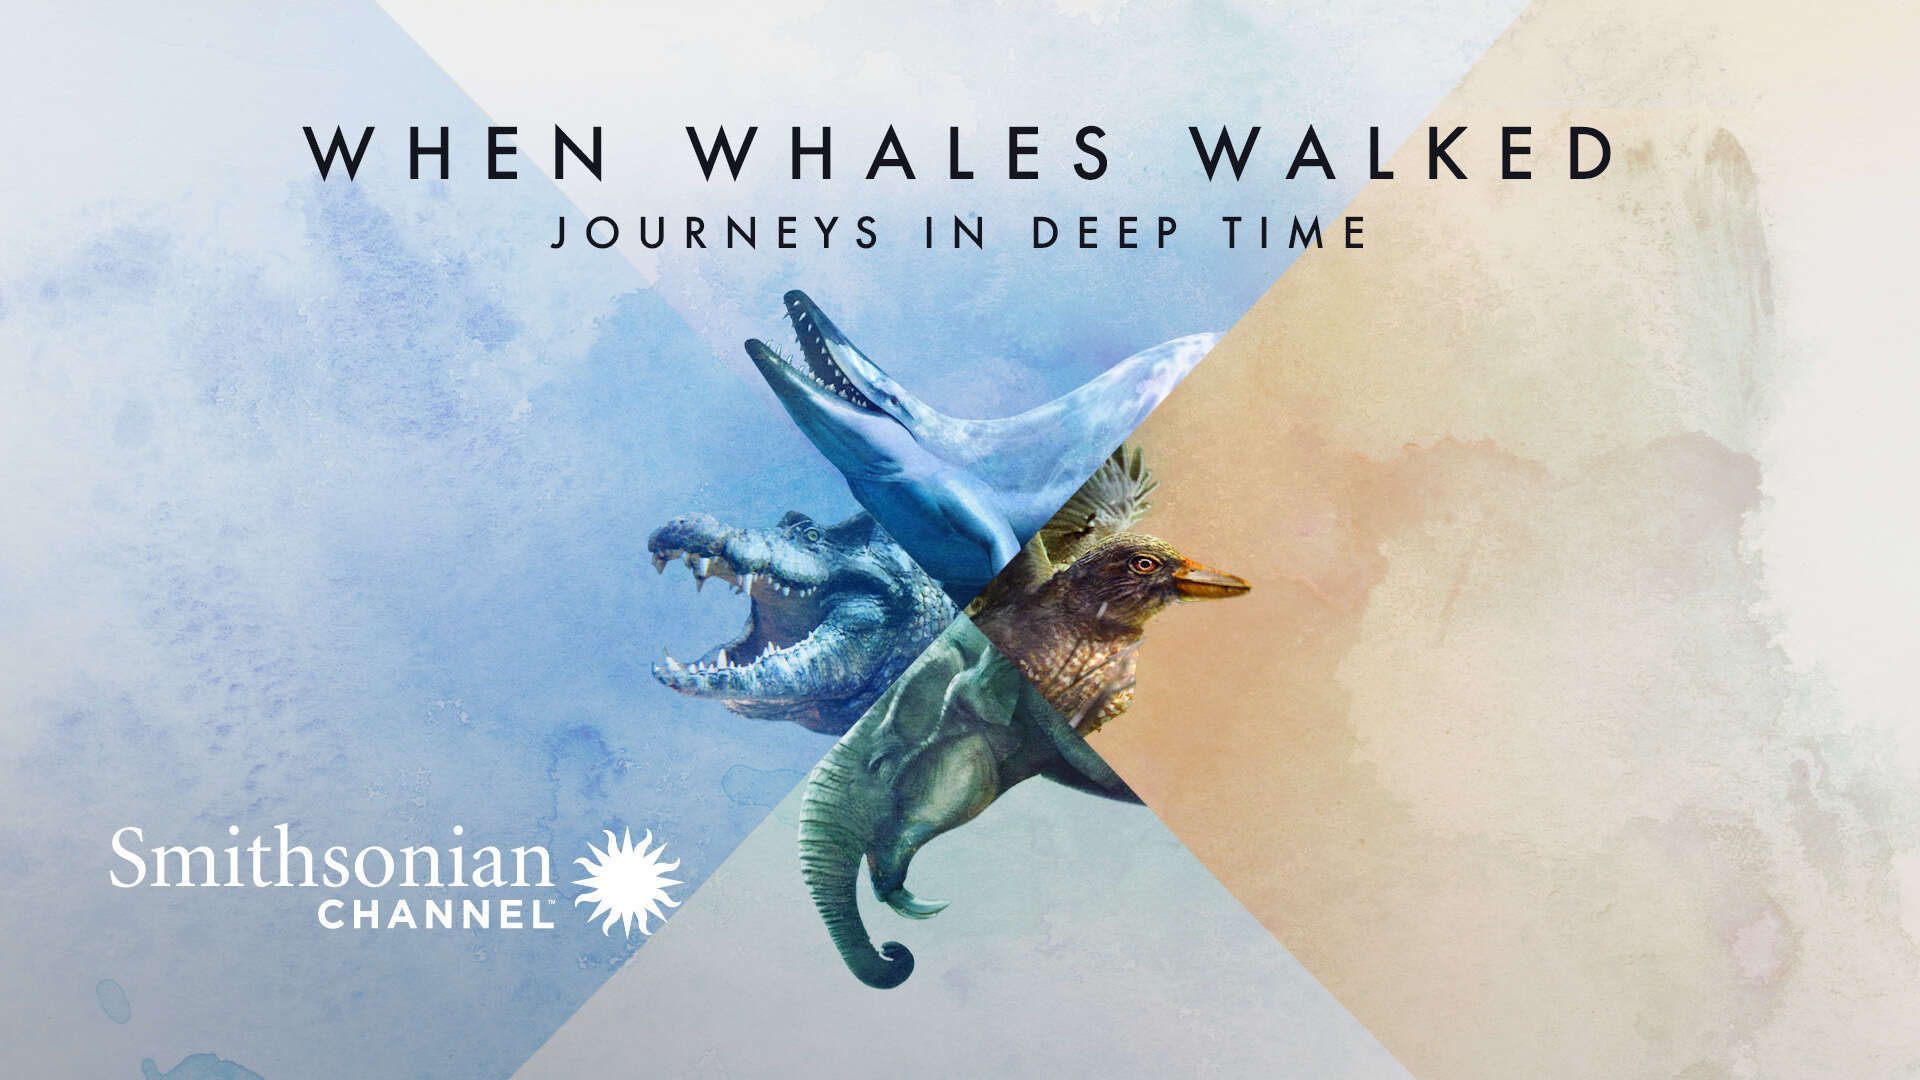 when whales walked journeys in deep time 2019